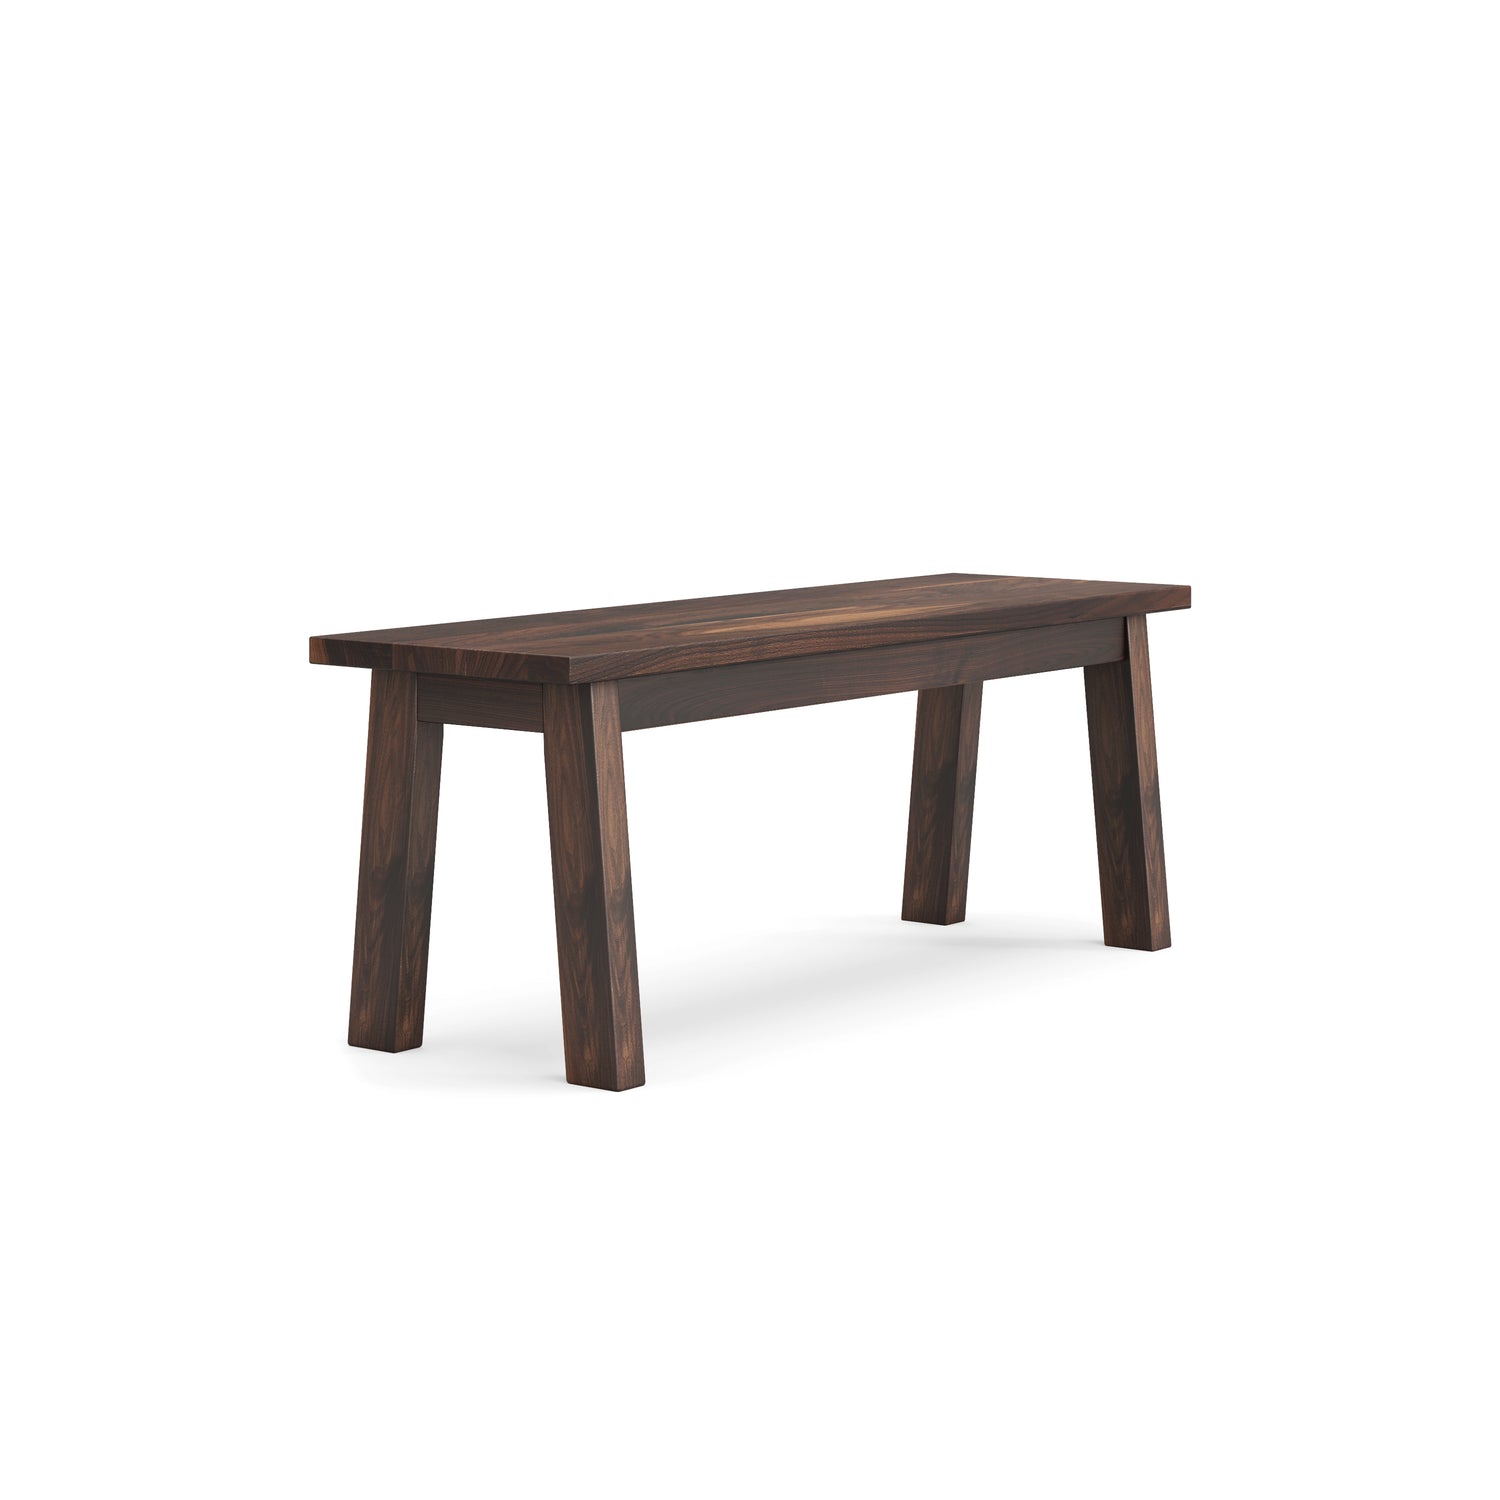 Luft solid wood bench